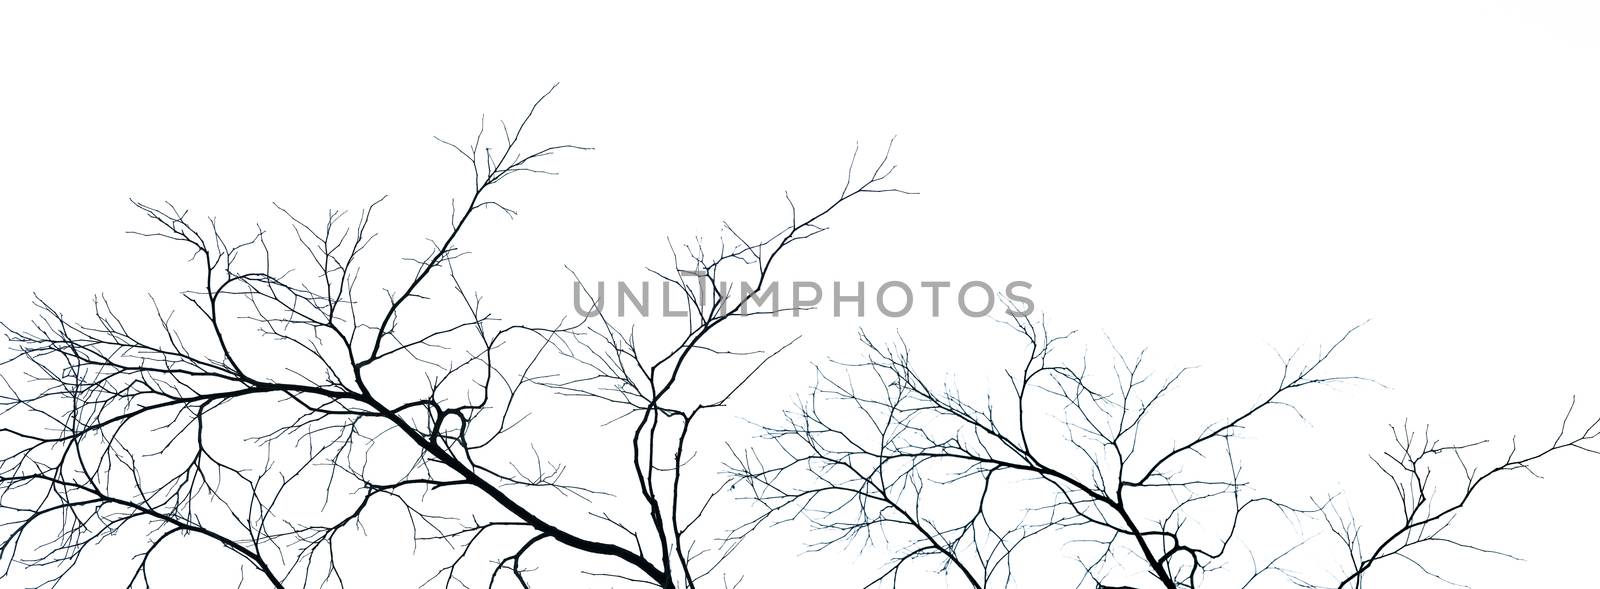 Dead tree and branch isolated on white background. Black branche by Fahroni